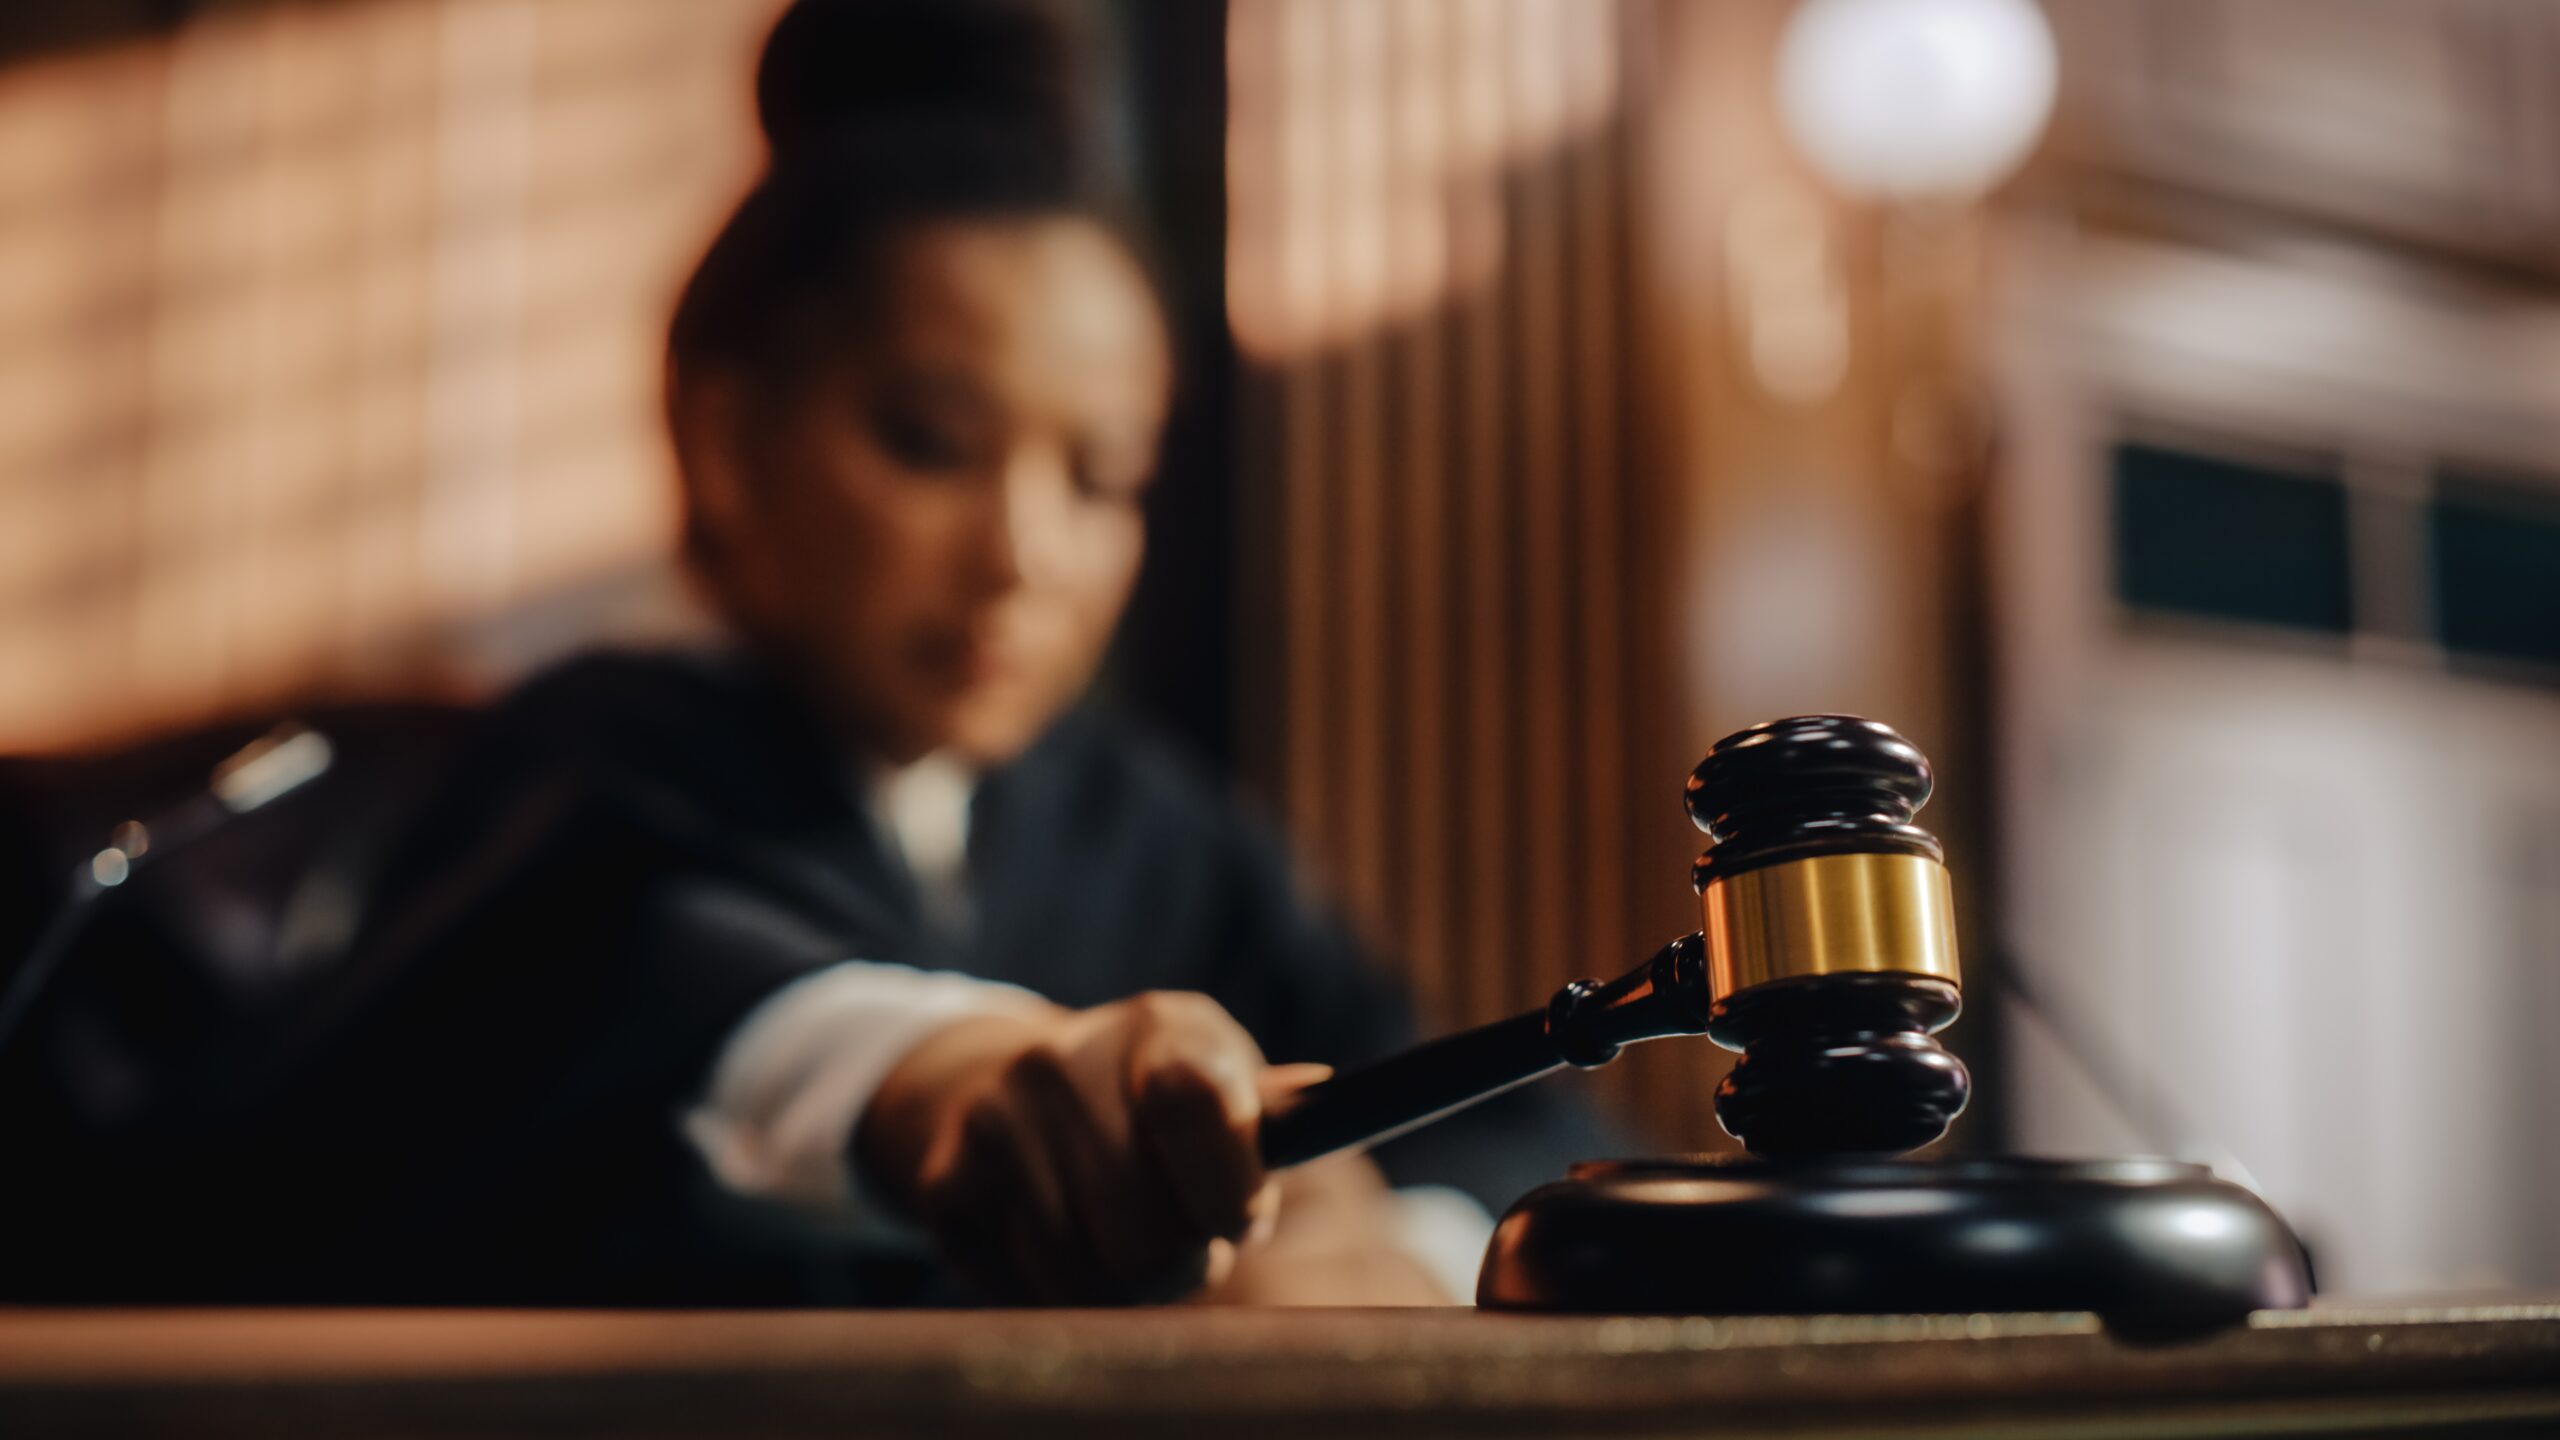 Focused image of a judge, partially visible and out of focus, about to strike a wooden gavel onto its base in a courtroom setting, with a warm glowing light in the background creating a serious atmosphere.